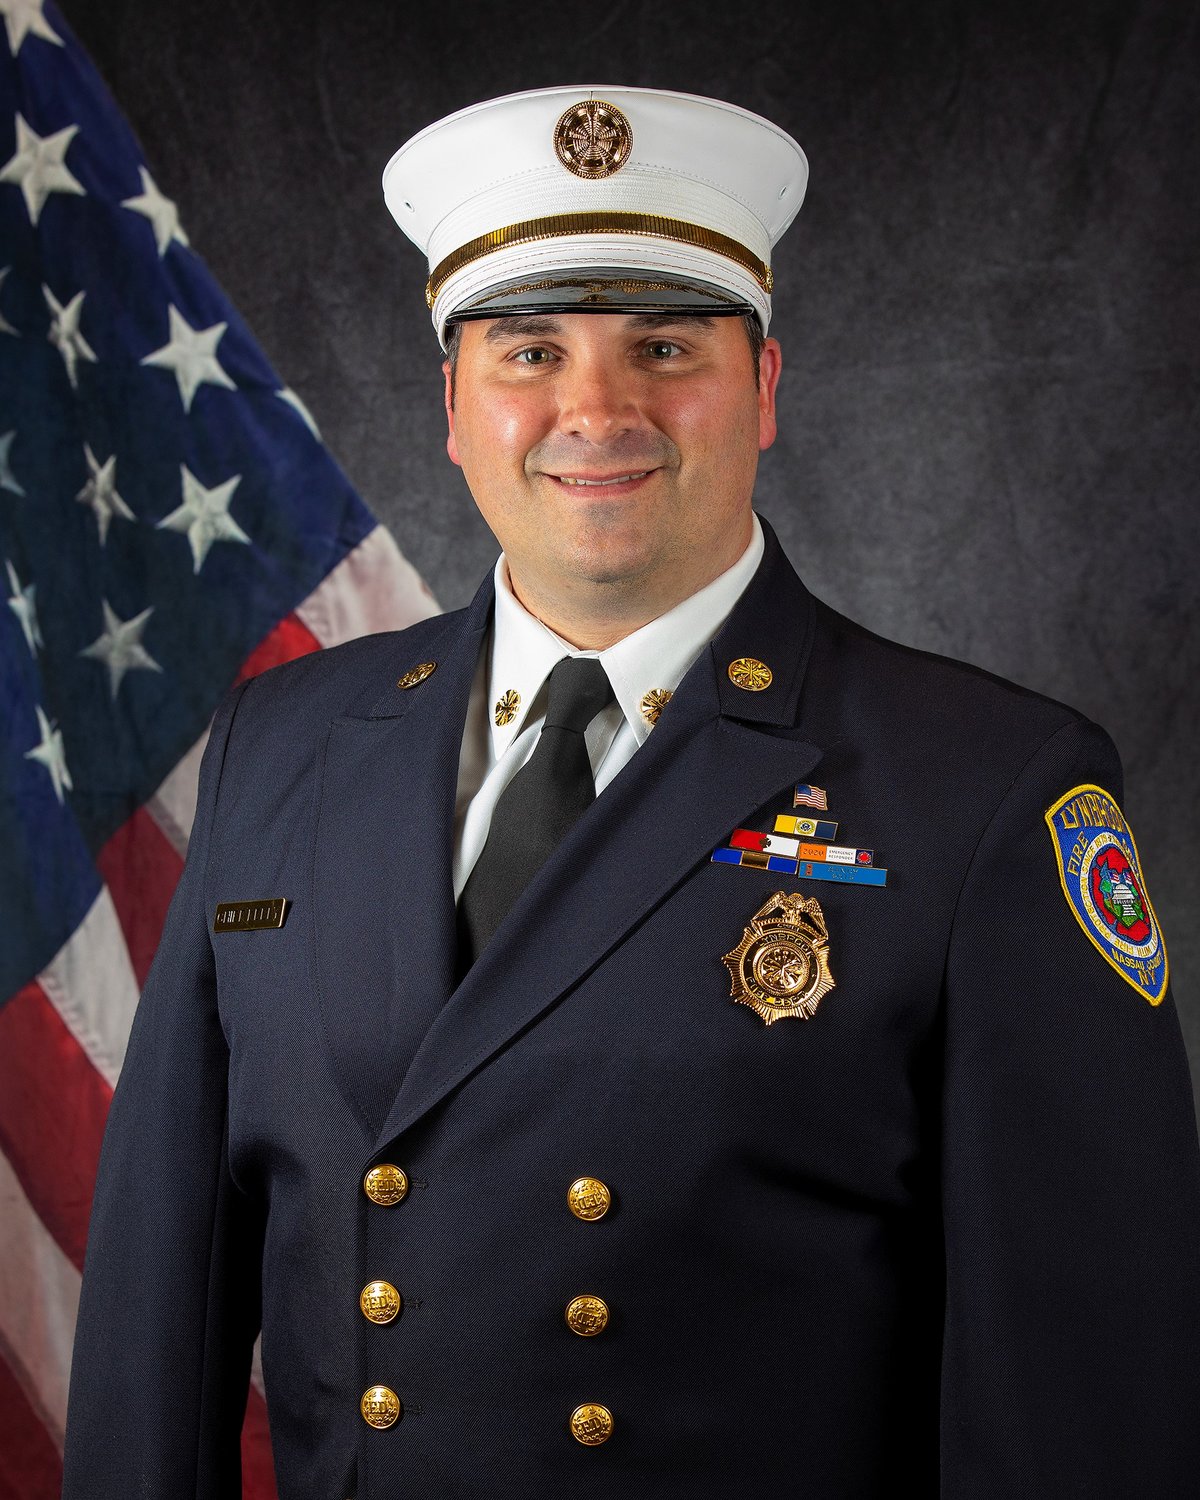 Kelly is the department’s 102nd fire chief.